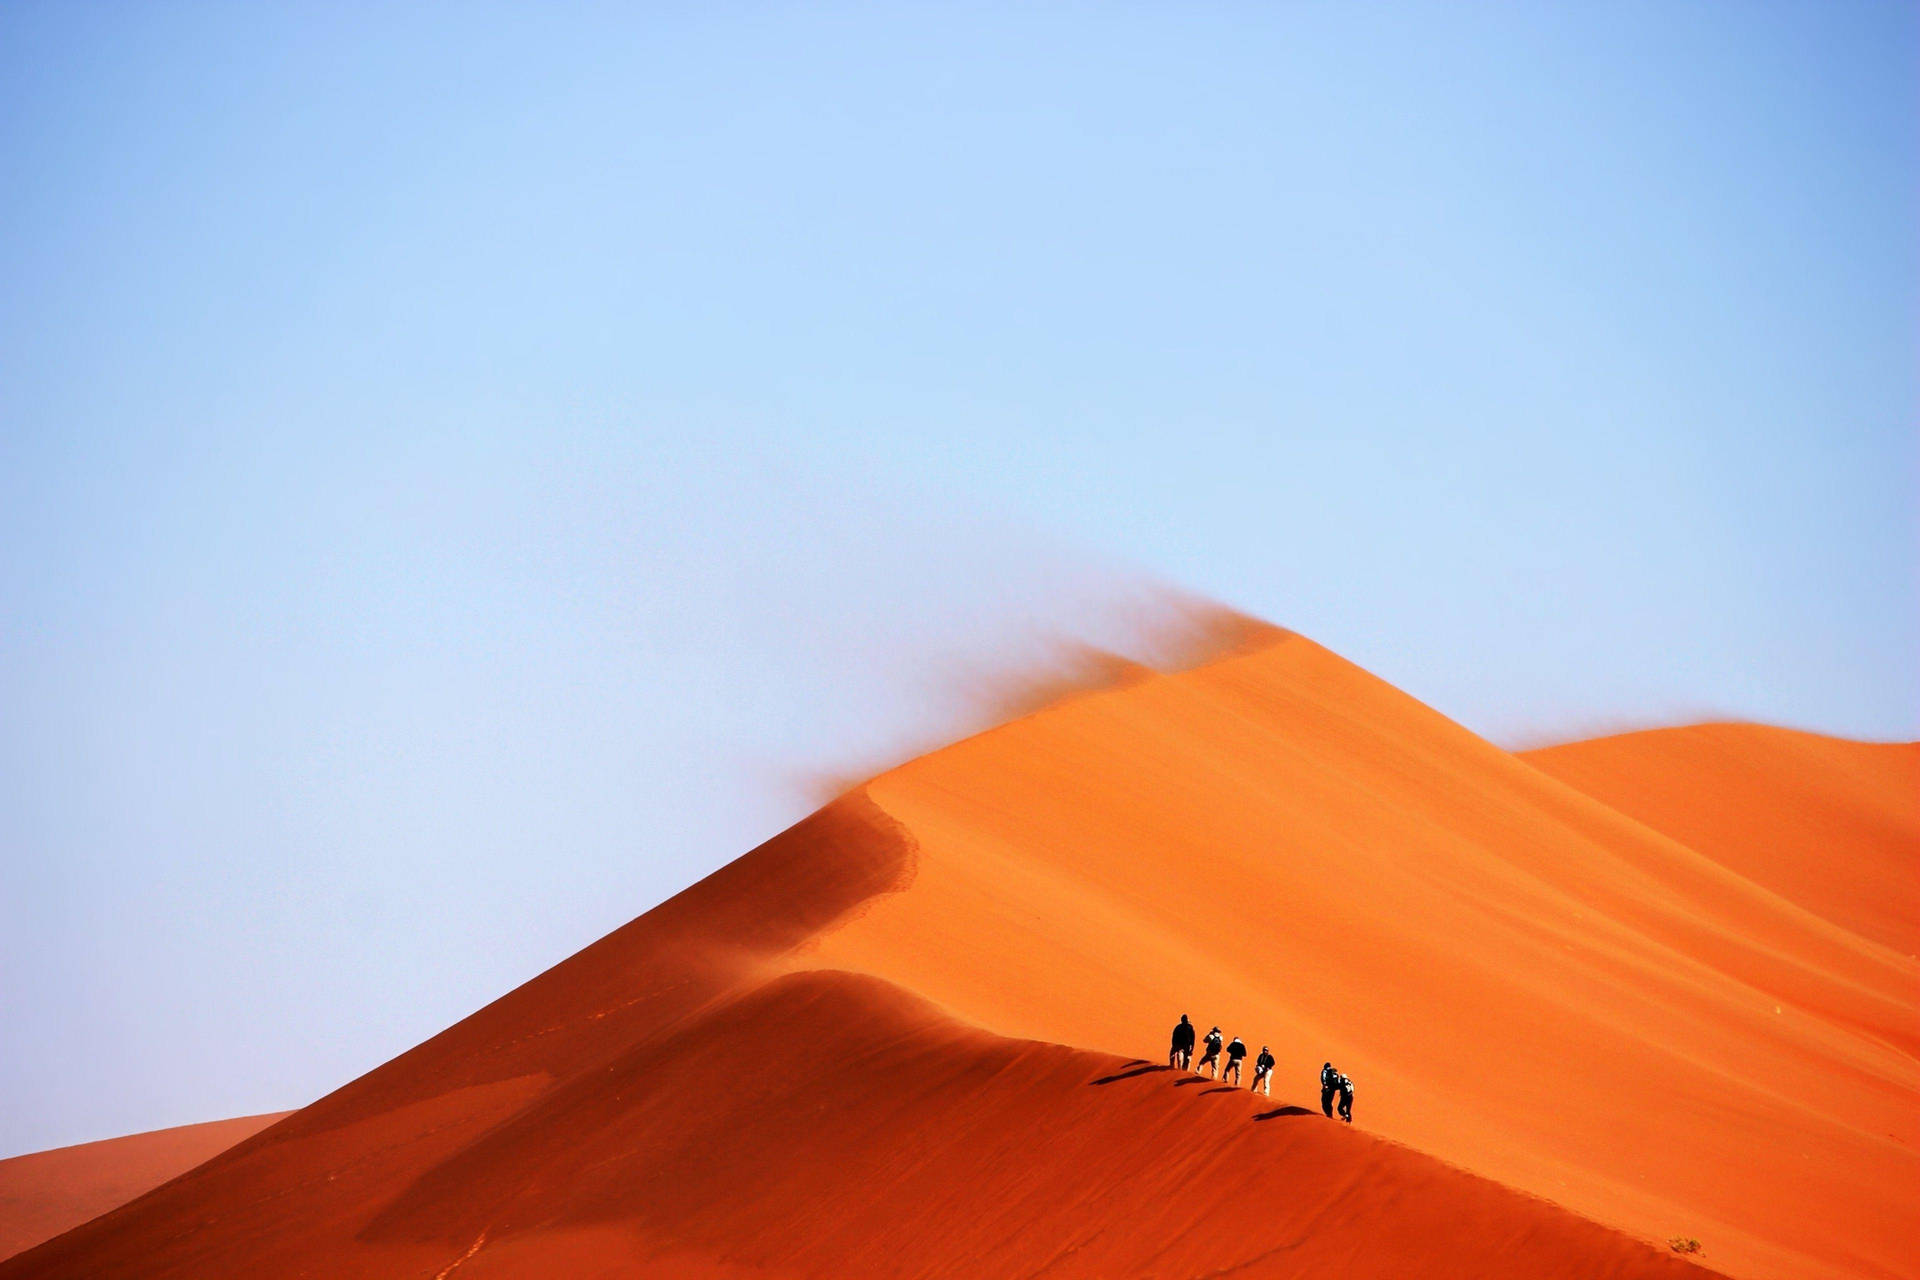 1)  A group of people seeking adventure, braving the elements in a windy desert! Wallpaper